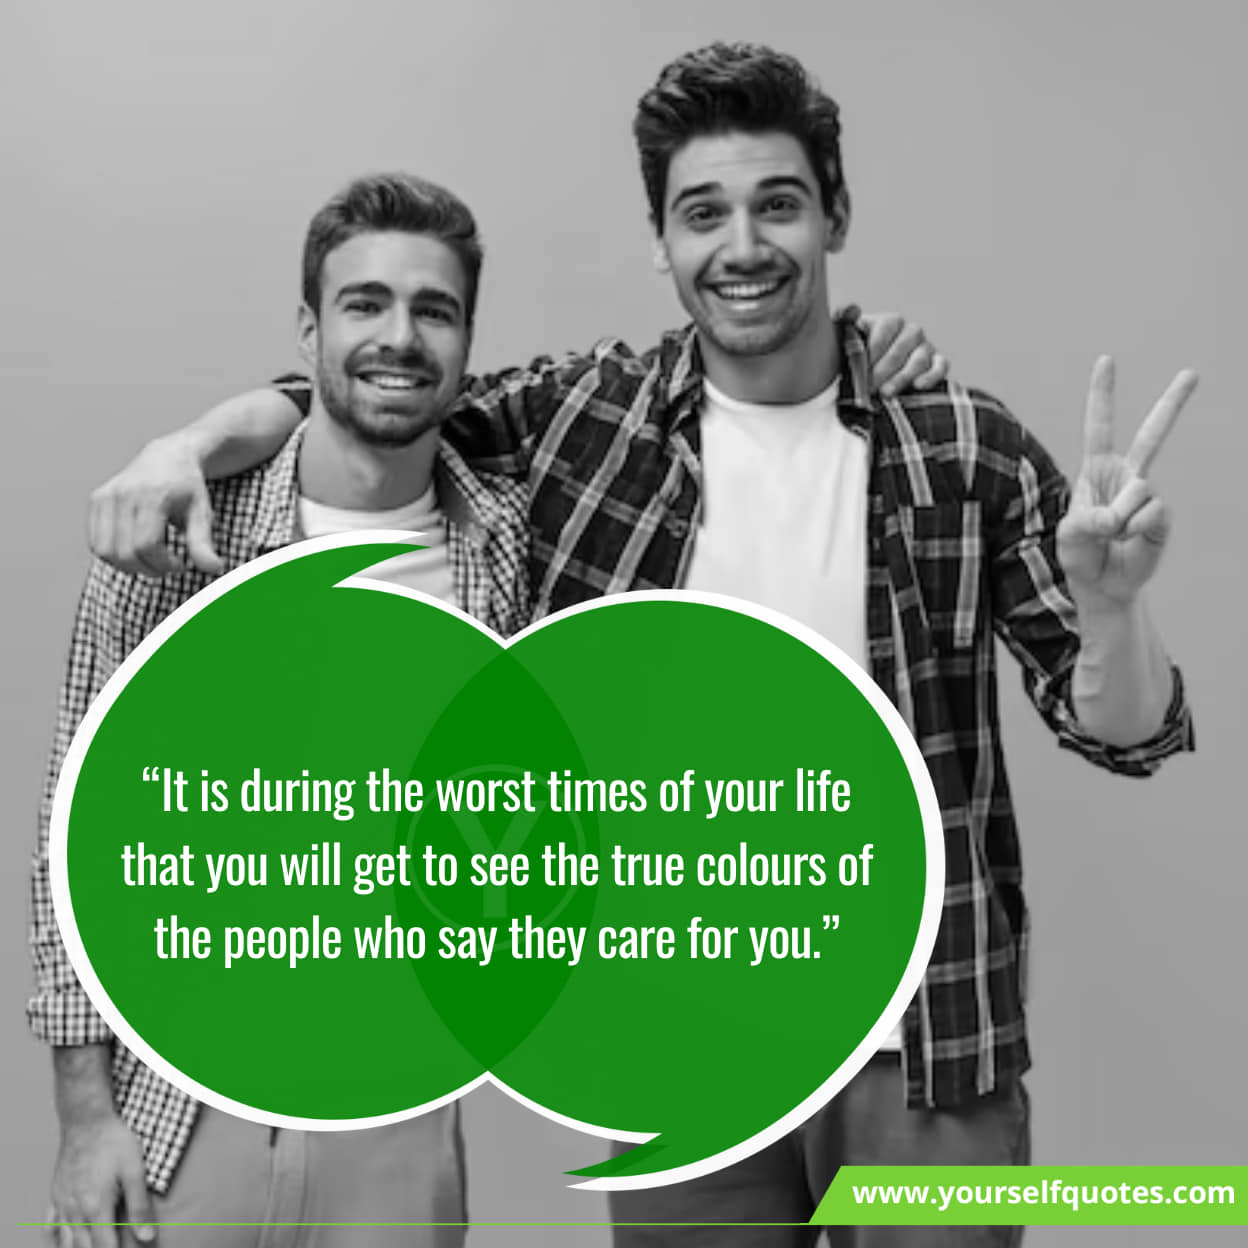 Quotes about making memories with friends